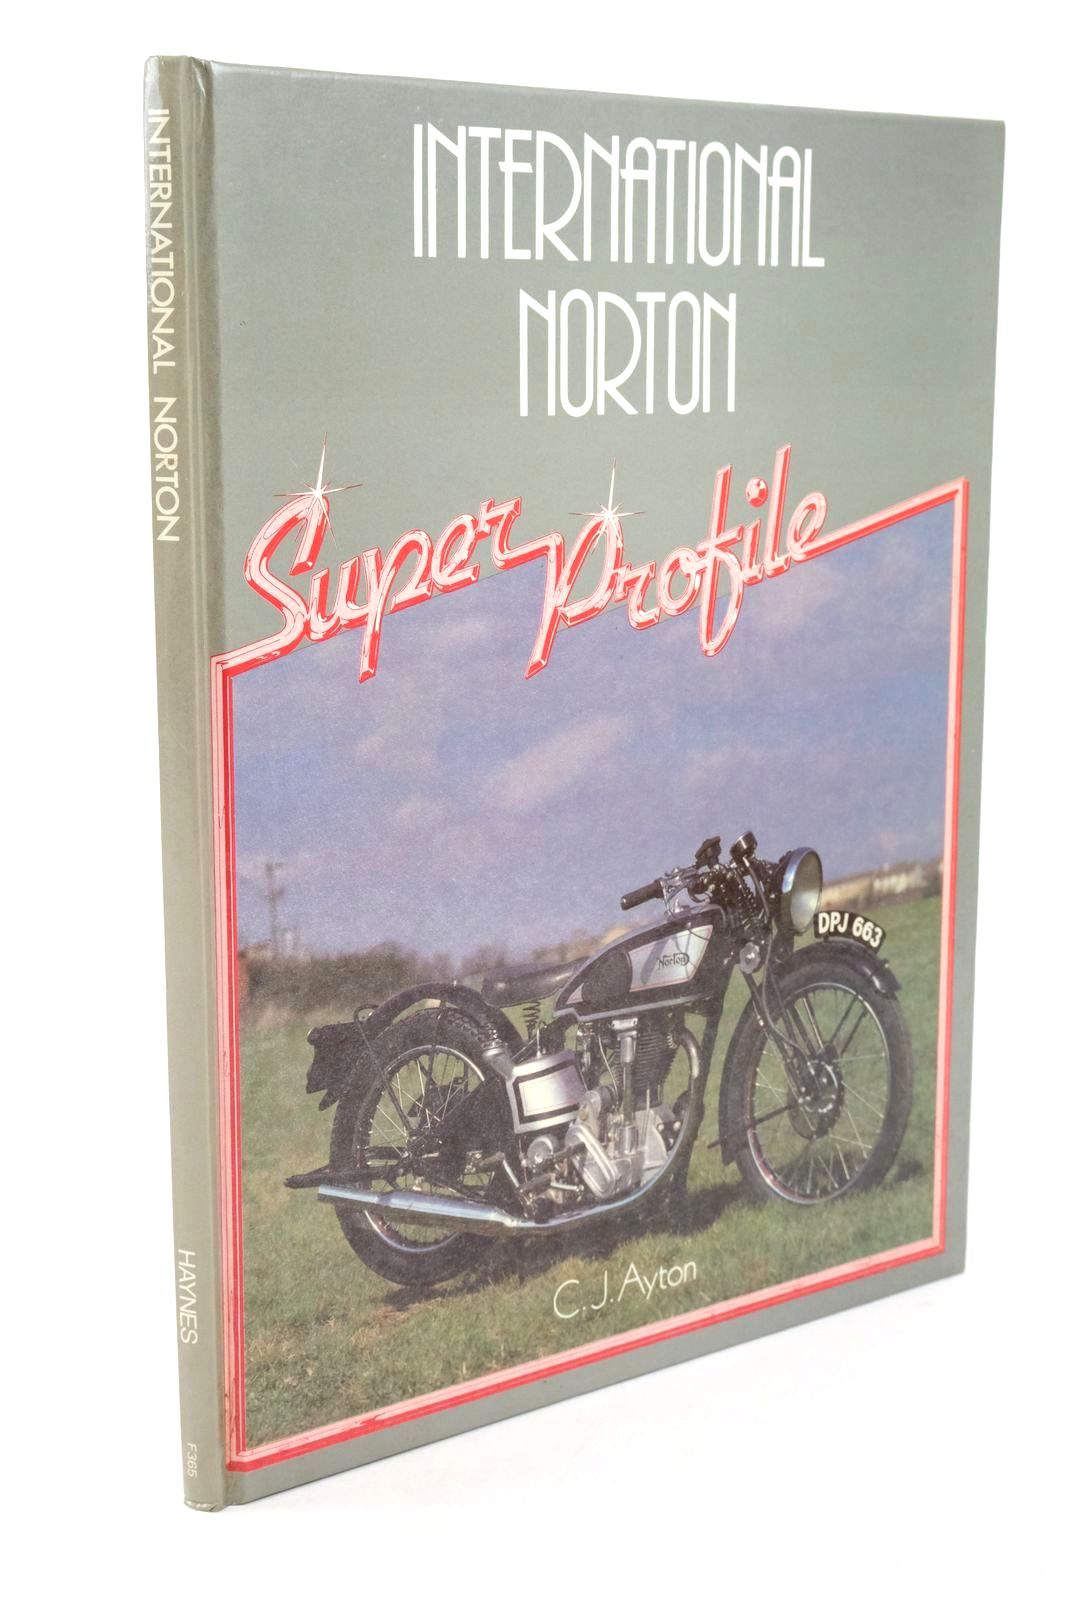 Photo of INTERNATIONAL NORTON written by Ayton, C.J. published by Haynes (STOCK CODE: 1322803)  for sale by Stella & Rose's Books